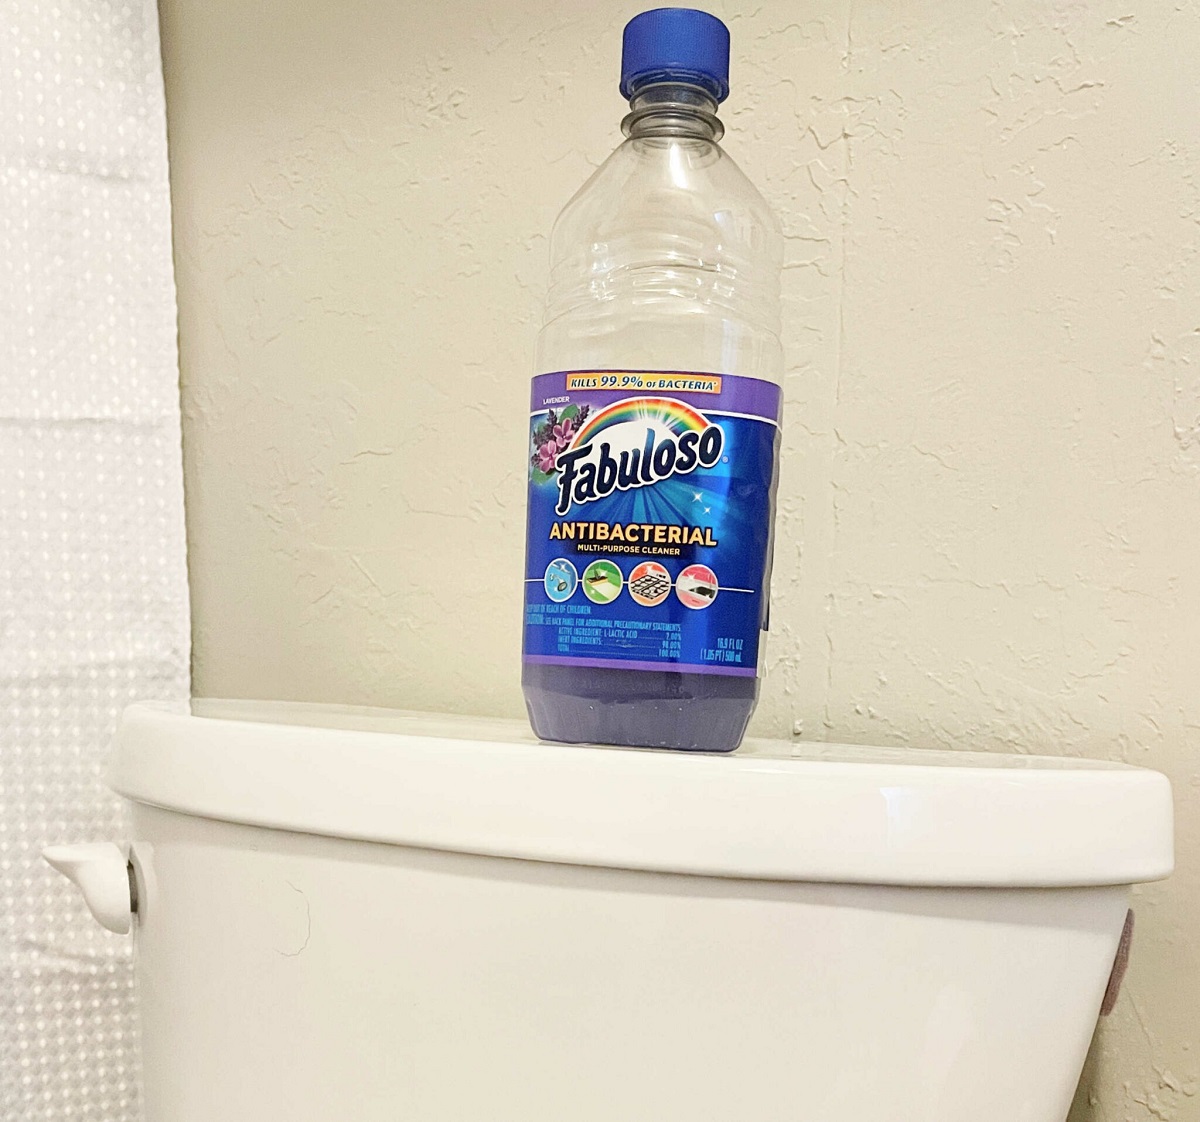 How To Put Fabuloso In Toilet Tank